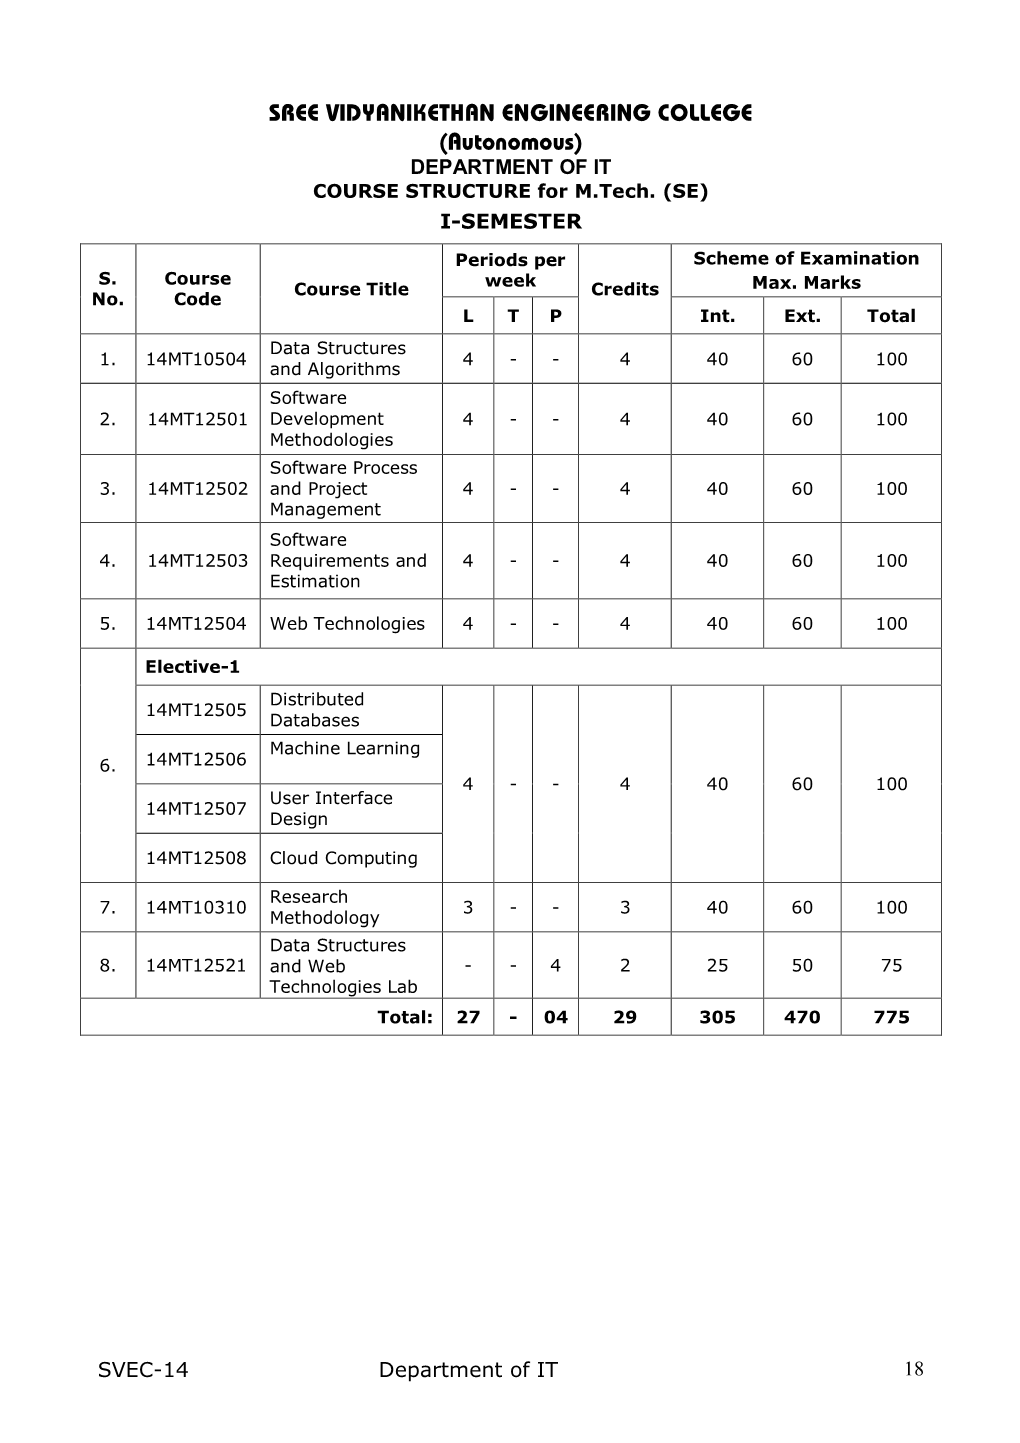 SREE VIDYANIKETHAN ENGINEERING COLLEGE (Autonomous) DEPARTMENT of IT COURSE STRUCTURE for M.Tech